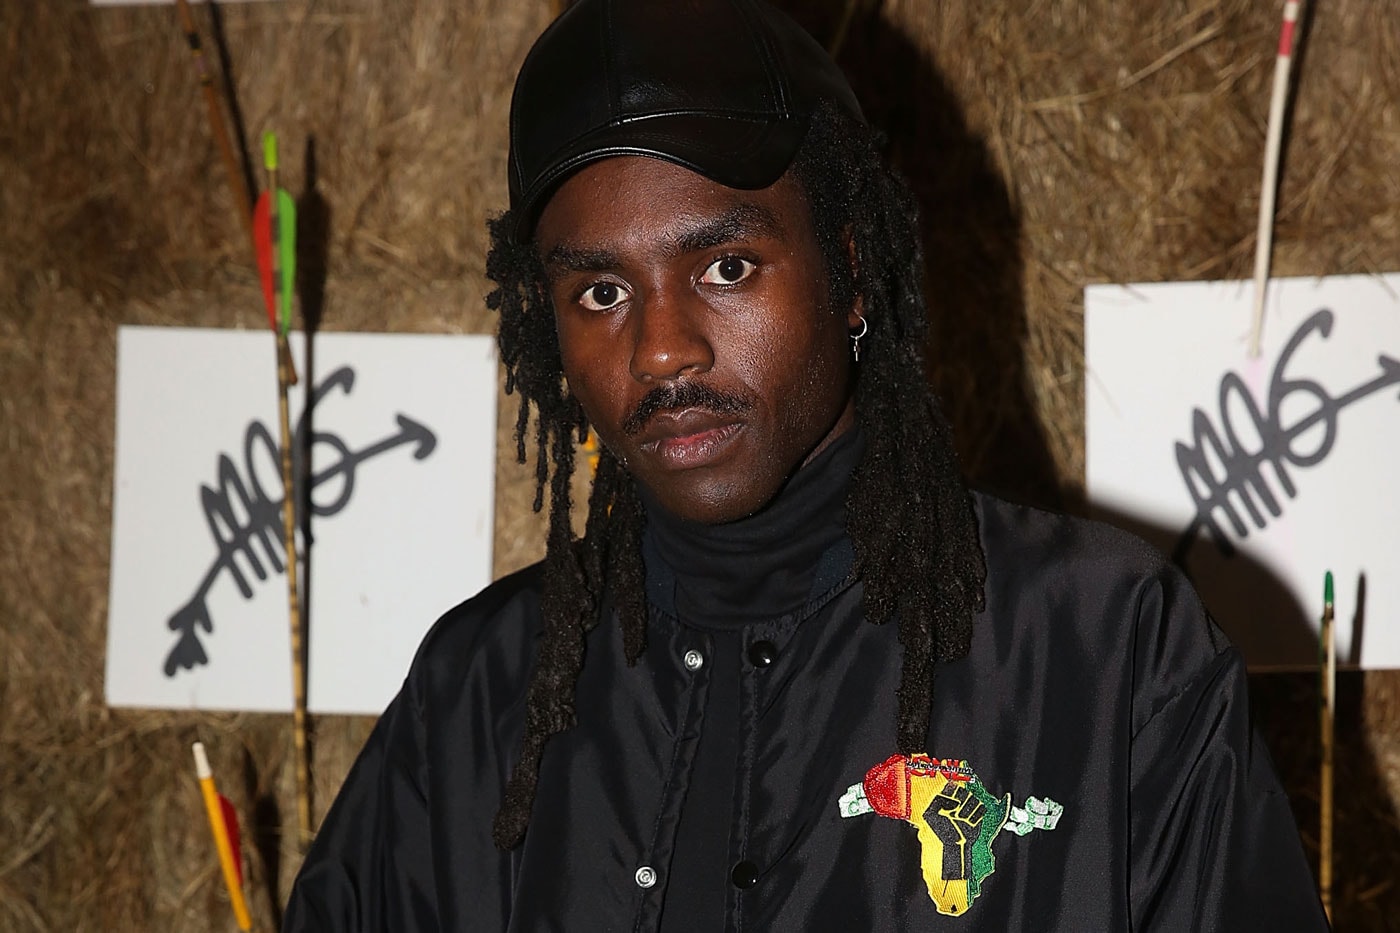 Dev Hynes Is Upset Over an Interview Done With Julian Casablancas of The Strokes